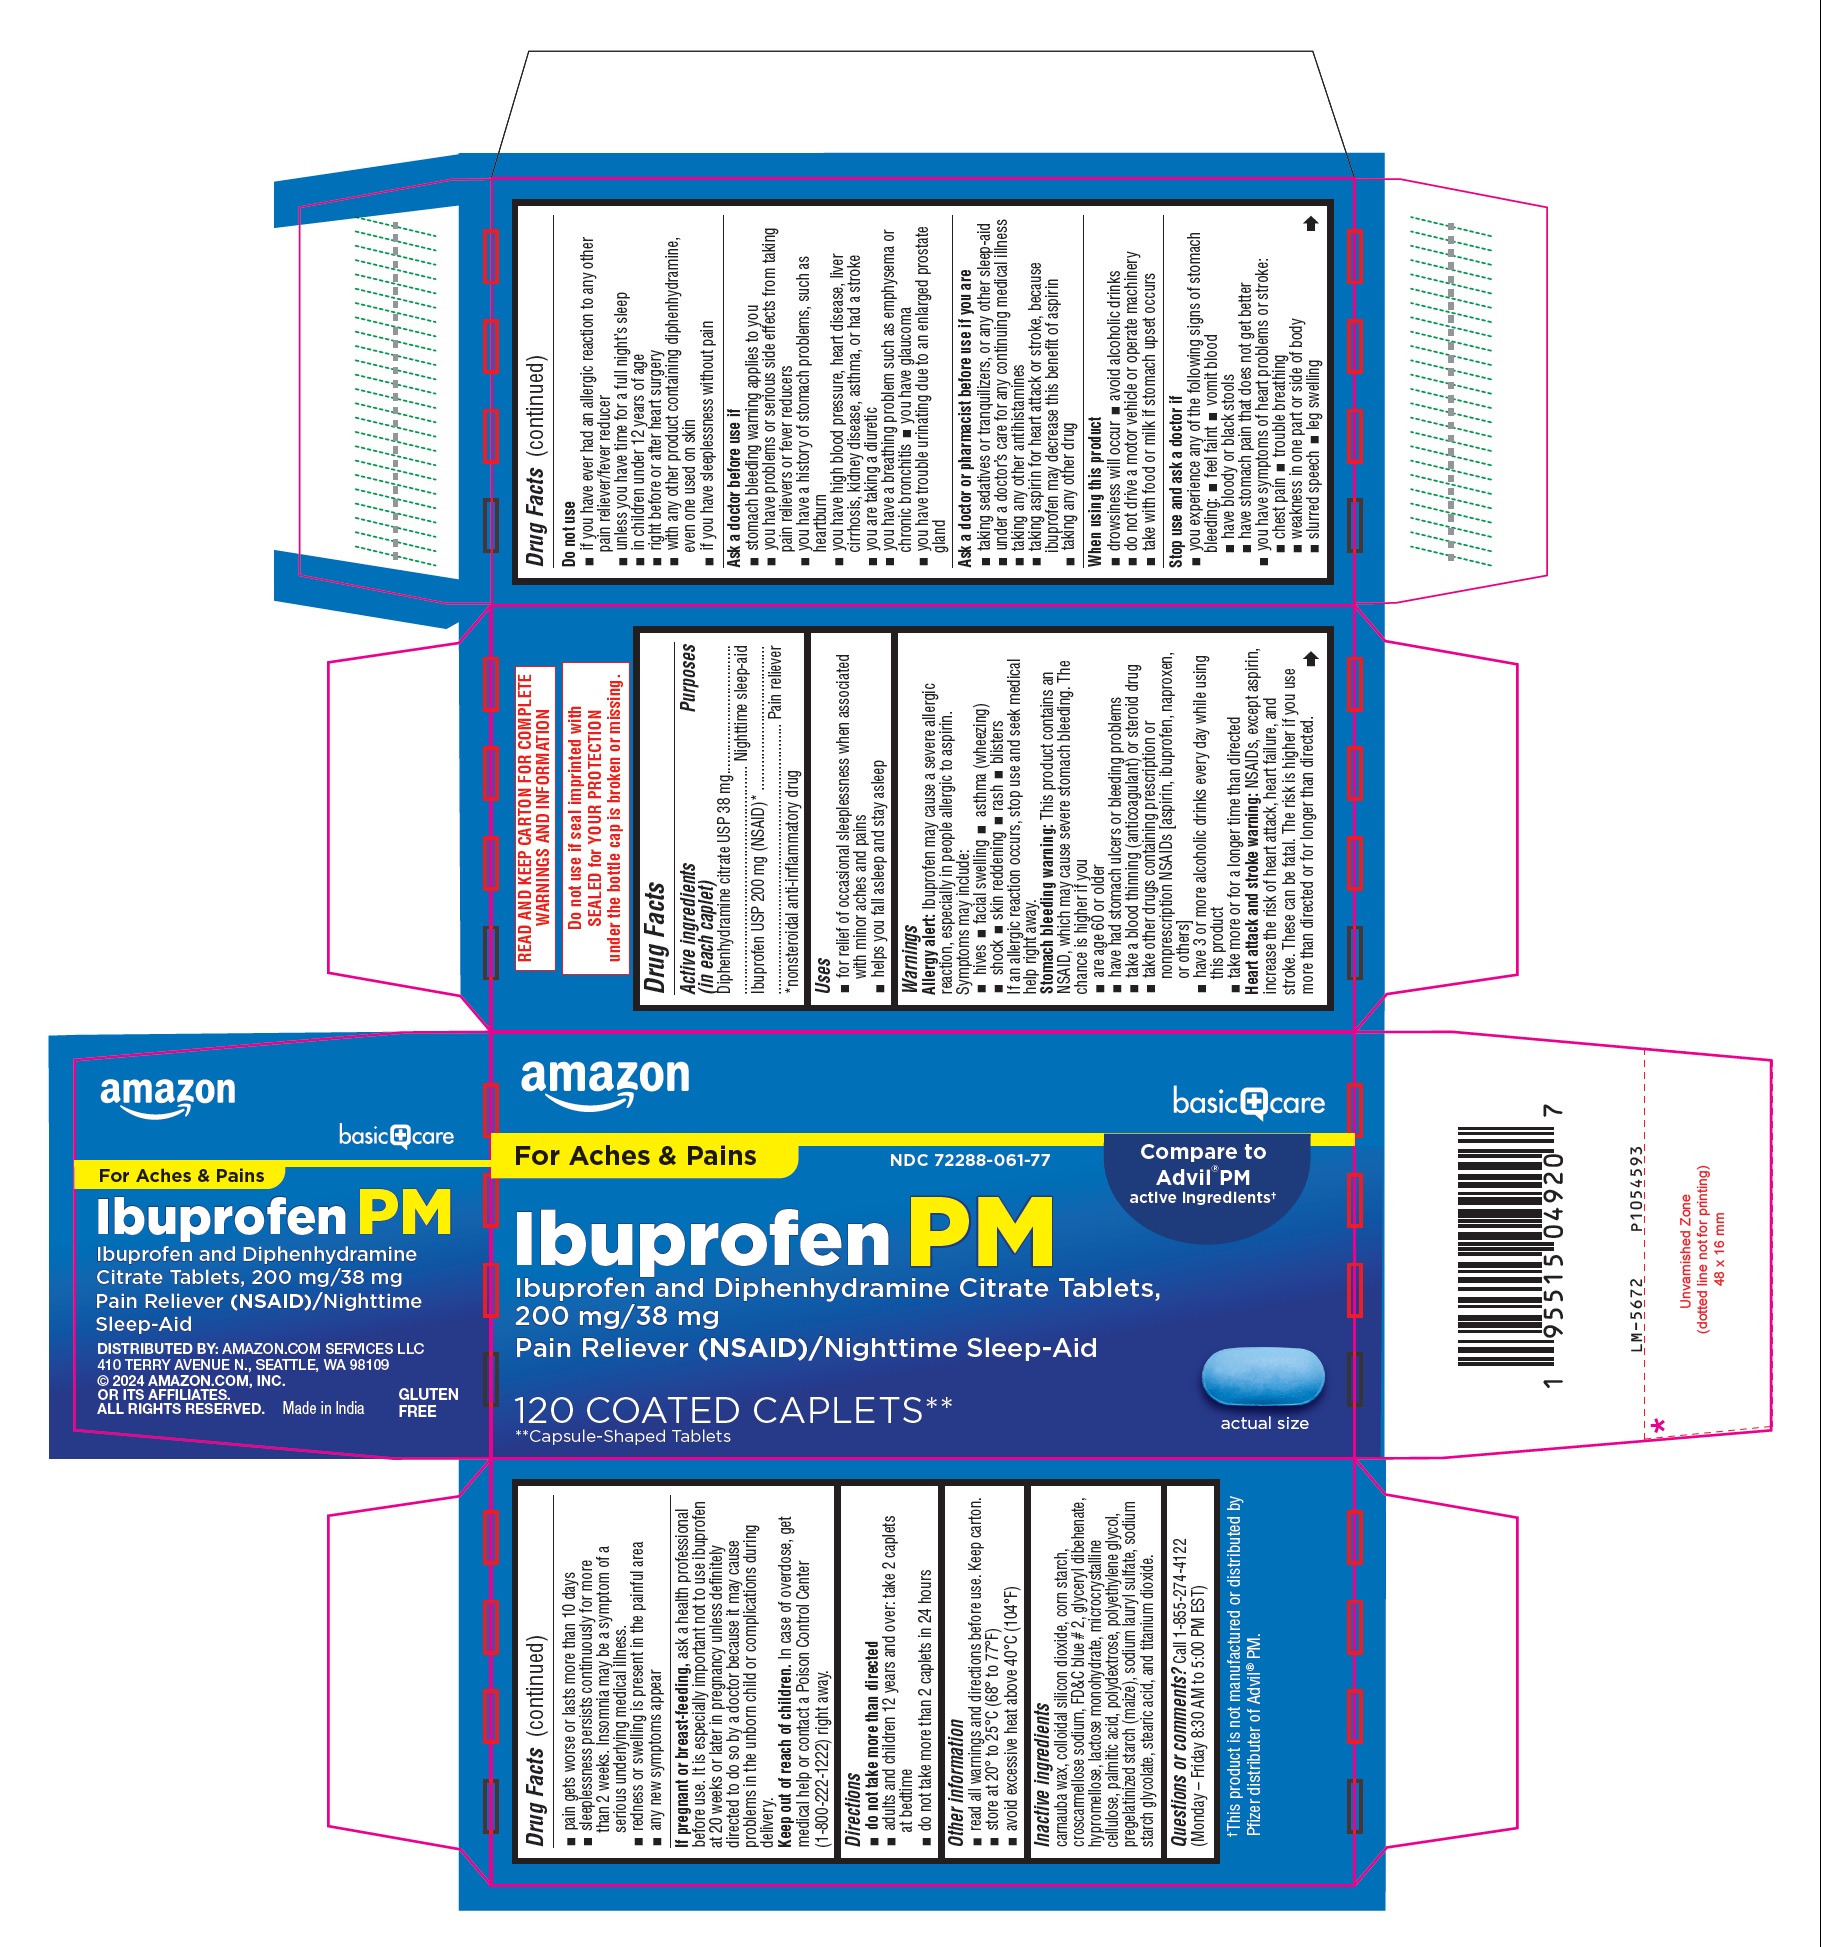 PACKAGE LABEL-PRINCIPAL DISPLAY PANEL - 200 mg/38 mg (120 Coated Caplets) Bottle Carton Label